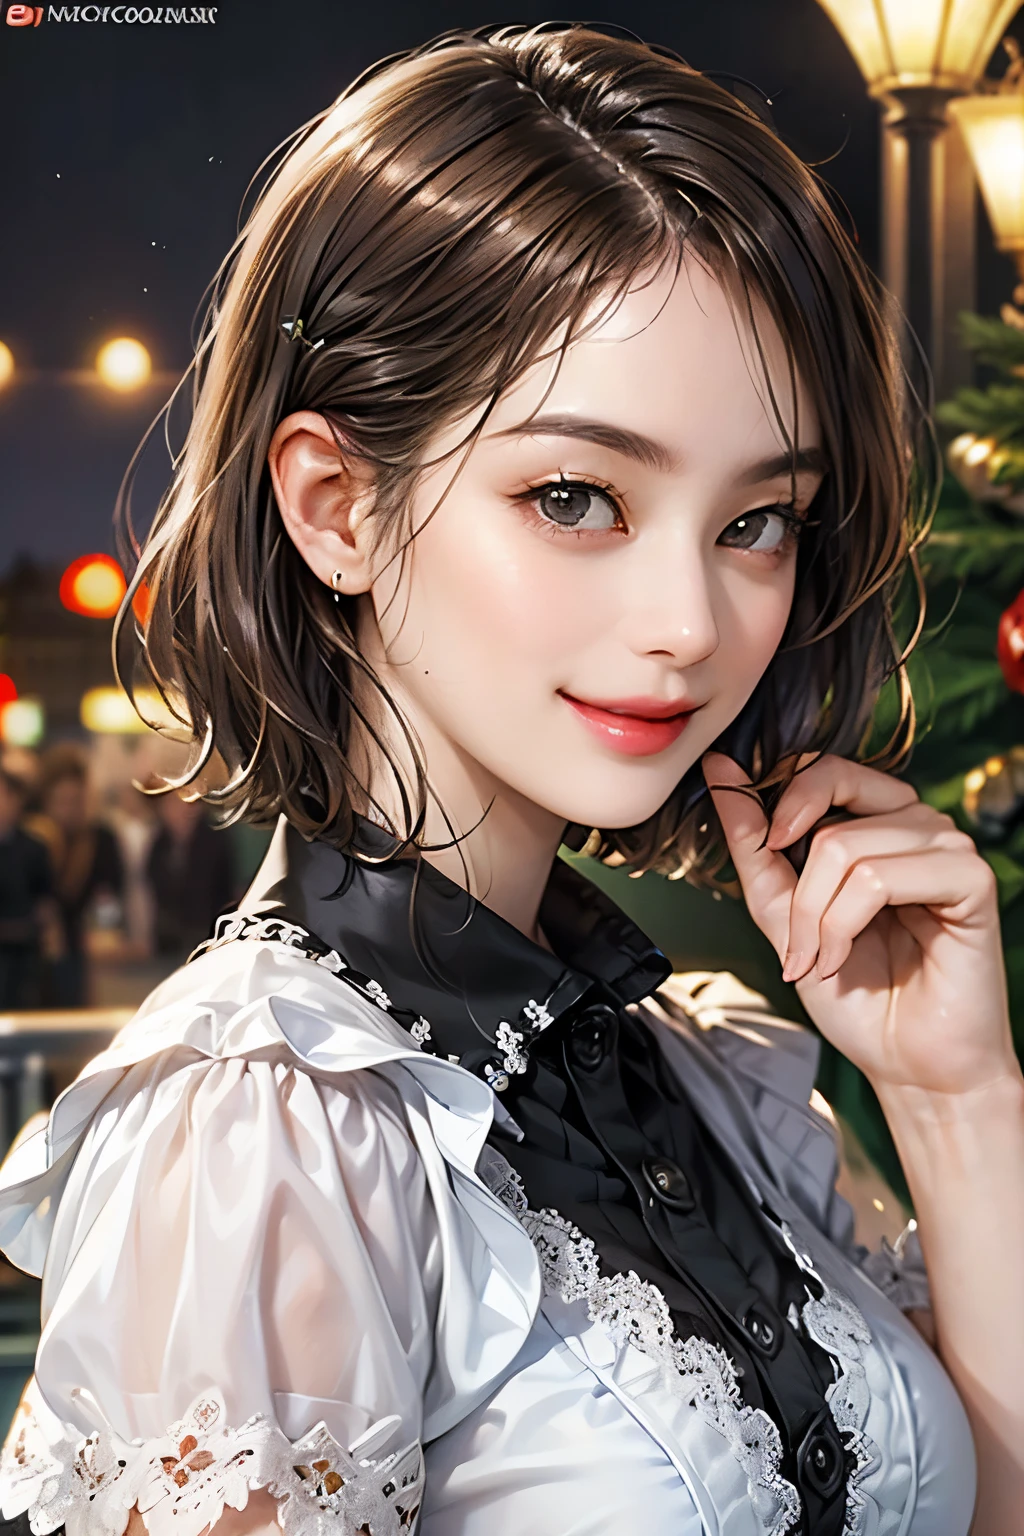 143
(a 20 yo woman), (A hyper-realistic), (high-level image quality), ((beautiful hairstyle 46)), ((short-hair:1.46)), (kindly smile), (breasted:1.1), (lipsticks)